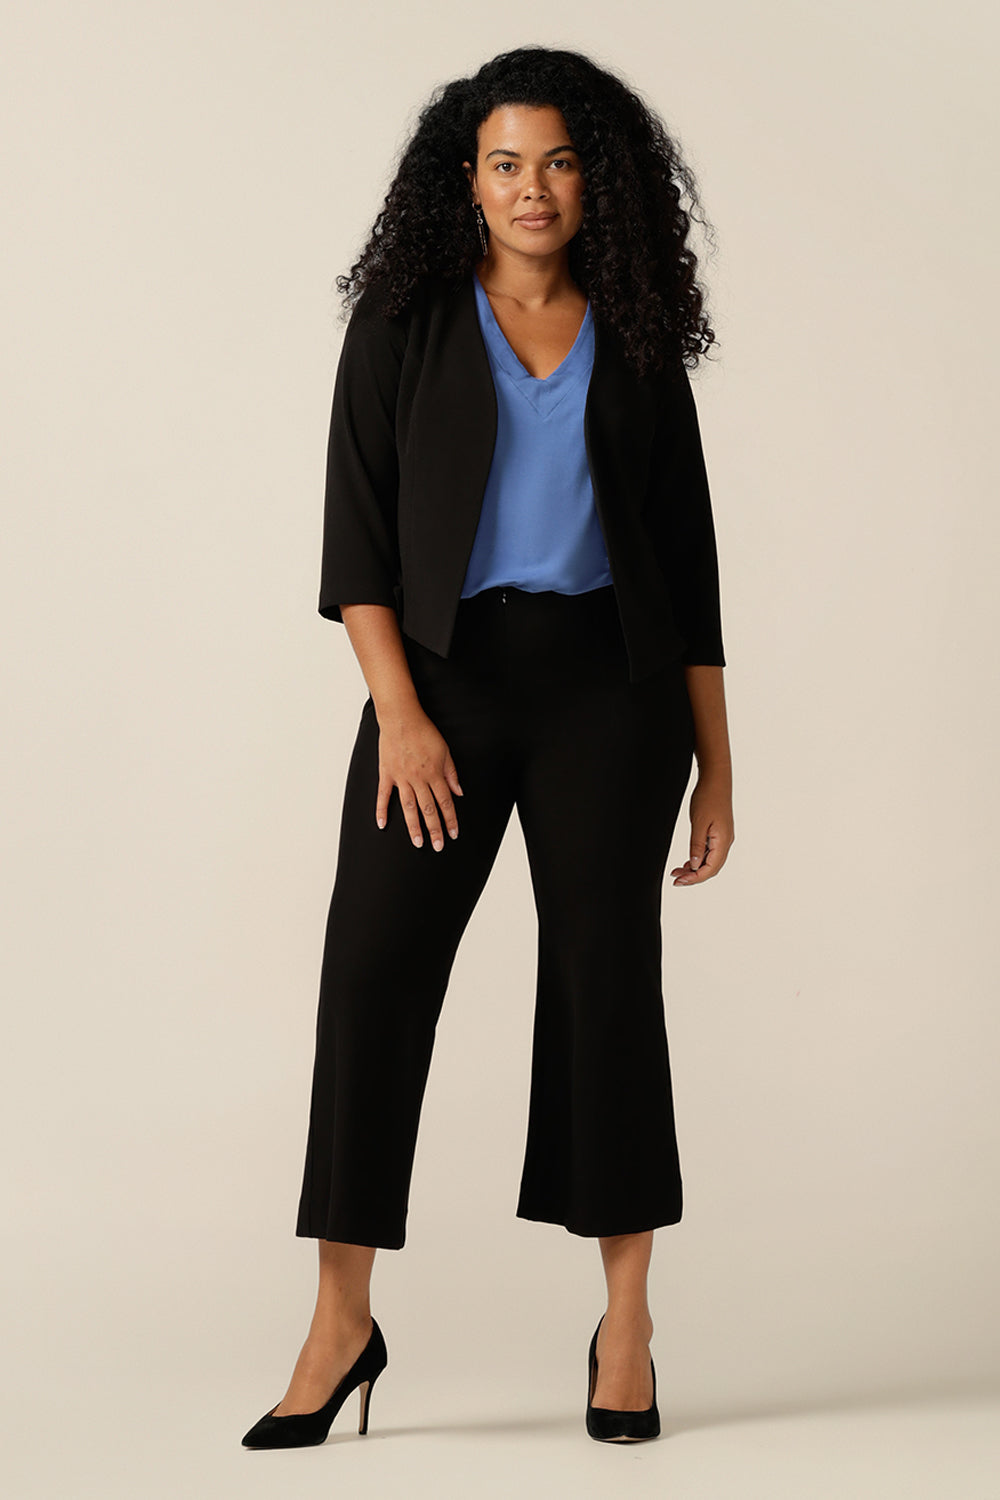 A size 12 woman wears a collarless, open-front black jacket with a blue bamboo jersey top and cropped, tailored black trousers for work. Made in Australia in stretch jersey, this corporate jacket is made from stretch jersey for a comfortable jacket fit. 